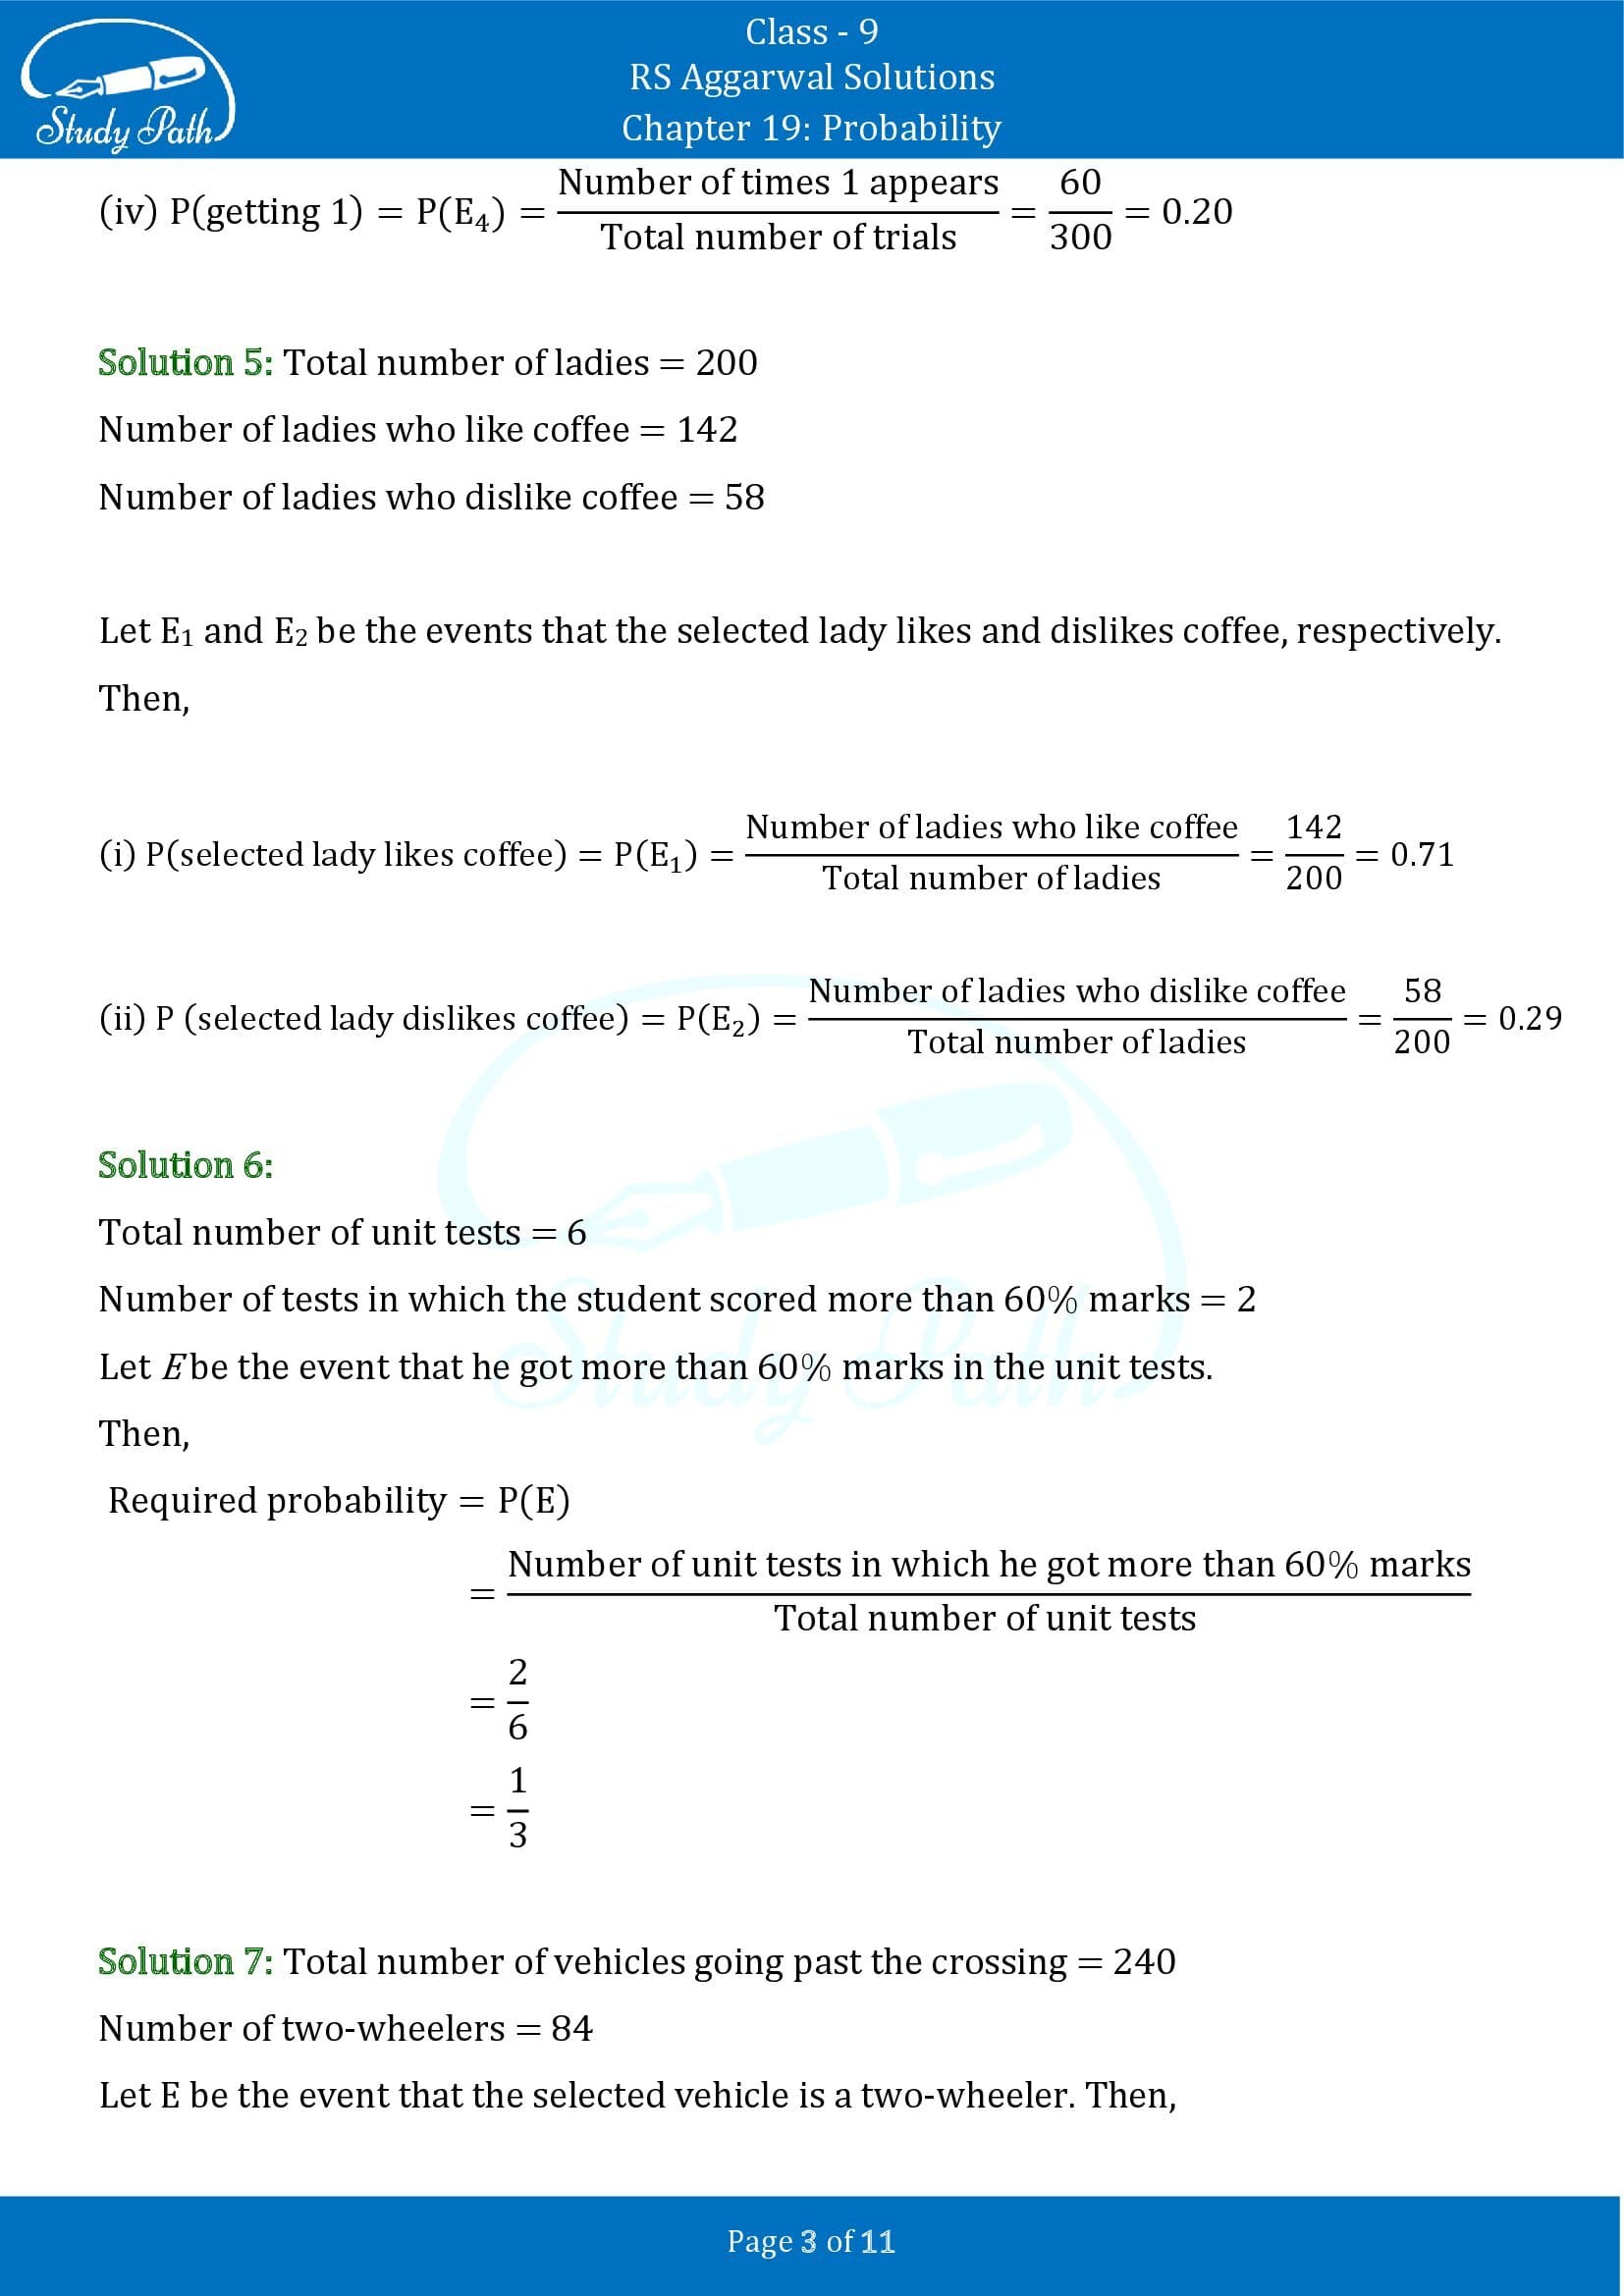 RS Aggarwal Solutions Class 9 Chapter 19 Probability Exercise 19 00003